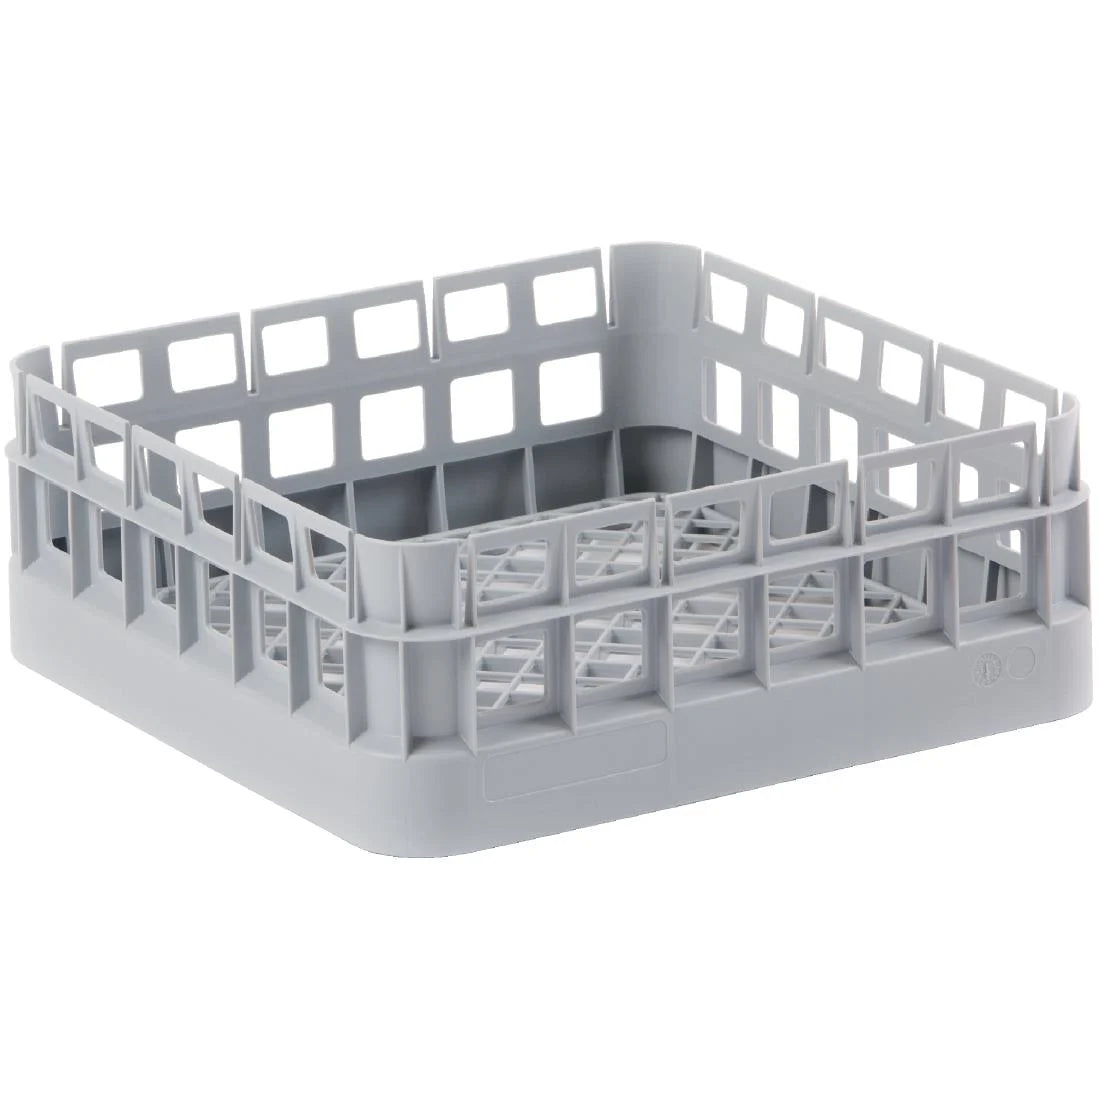 Classeq Ware Washer Open Basket 16 Compartments.Product Ref:00689.Model: CF624. 🚚 1-3 Days Delivery